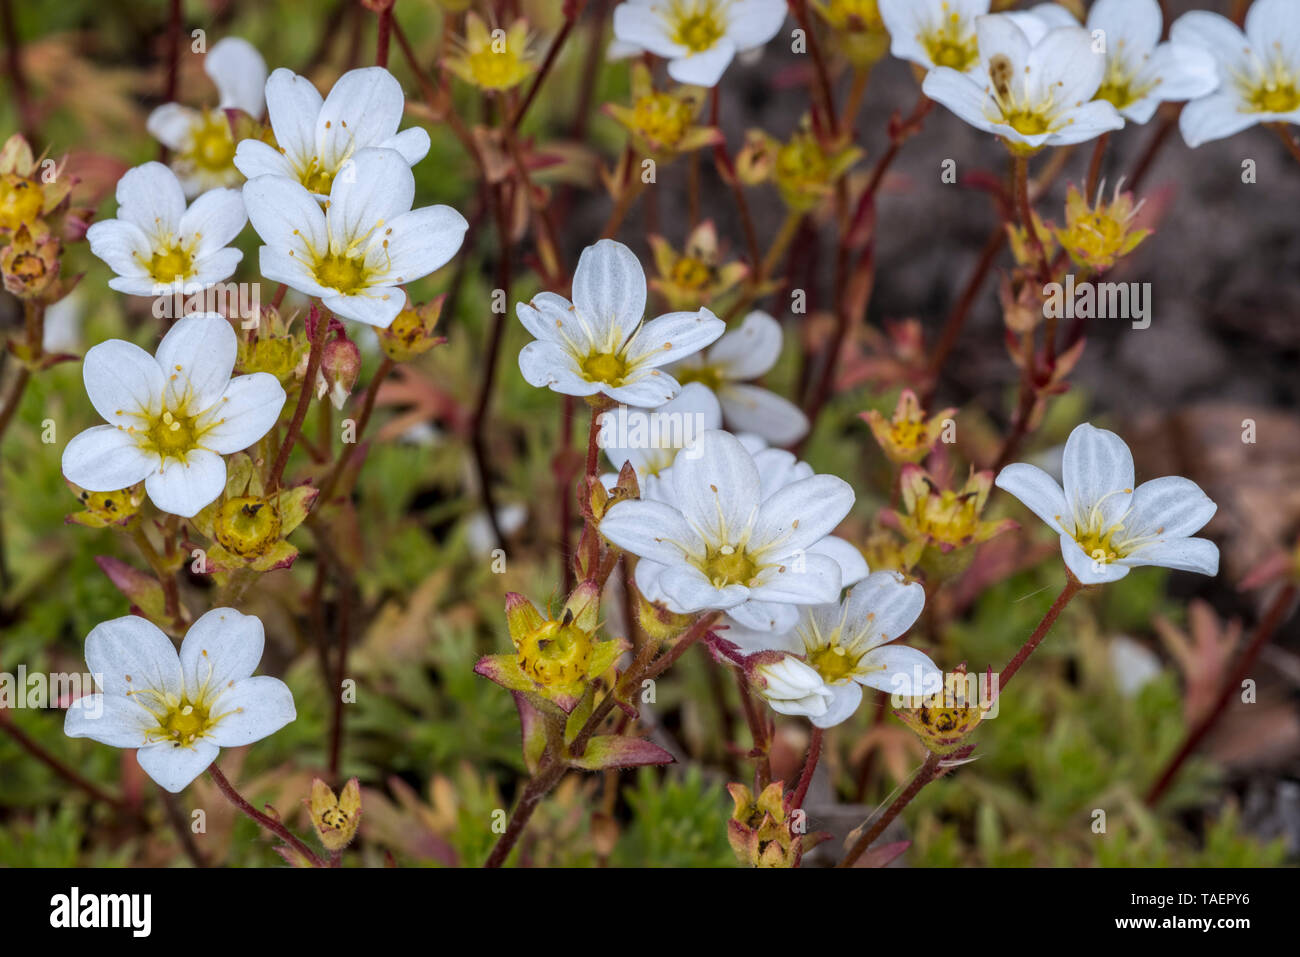 Mossy saxifrage / Dovedale moss (Saxifraga hypnoides) in flower Stock Photo